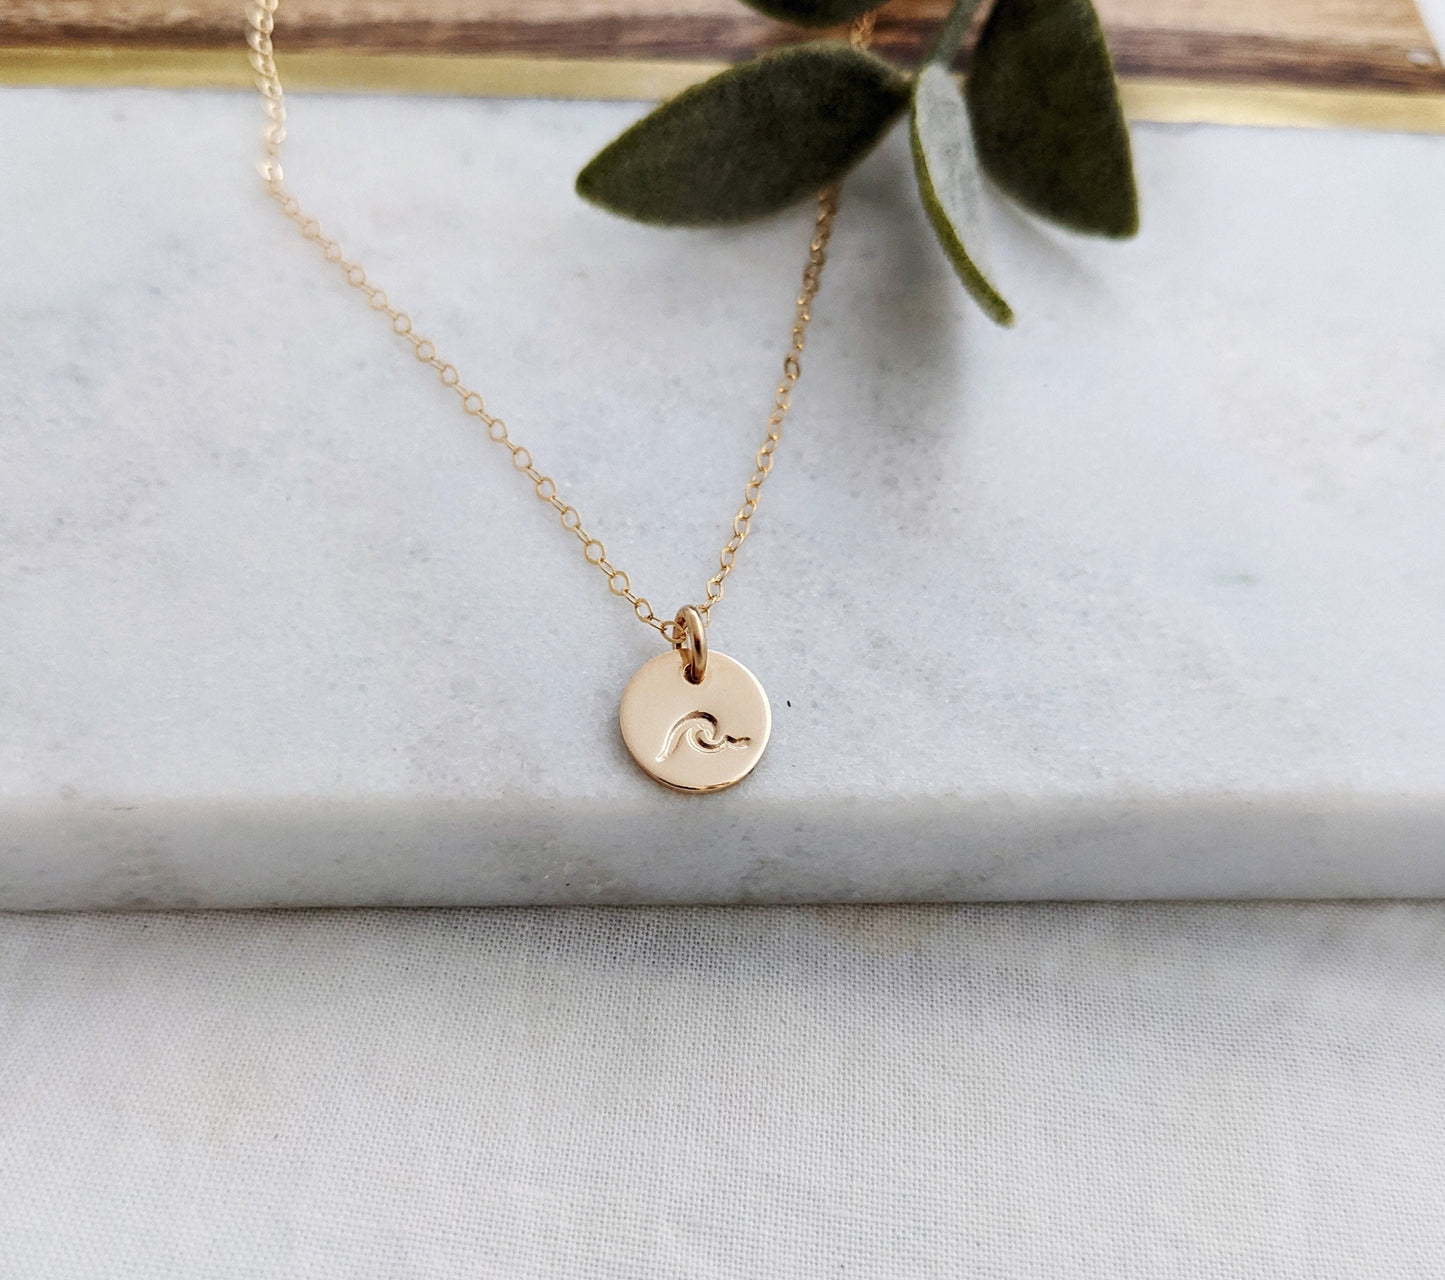 Tiny Wave Necklace | Ocean Lover Gift | Sterling Silver or 14k gold fill | Tiny Disc Necklace